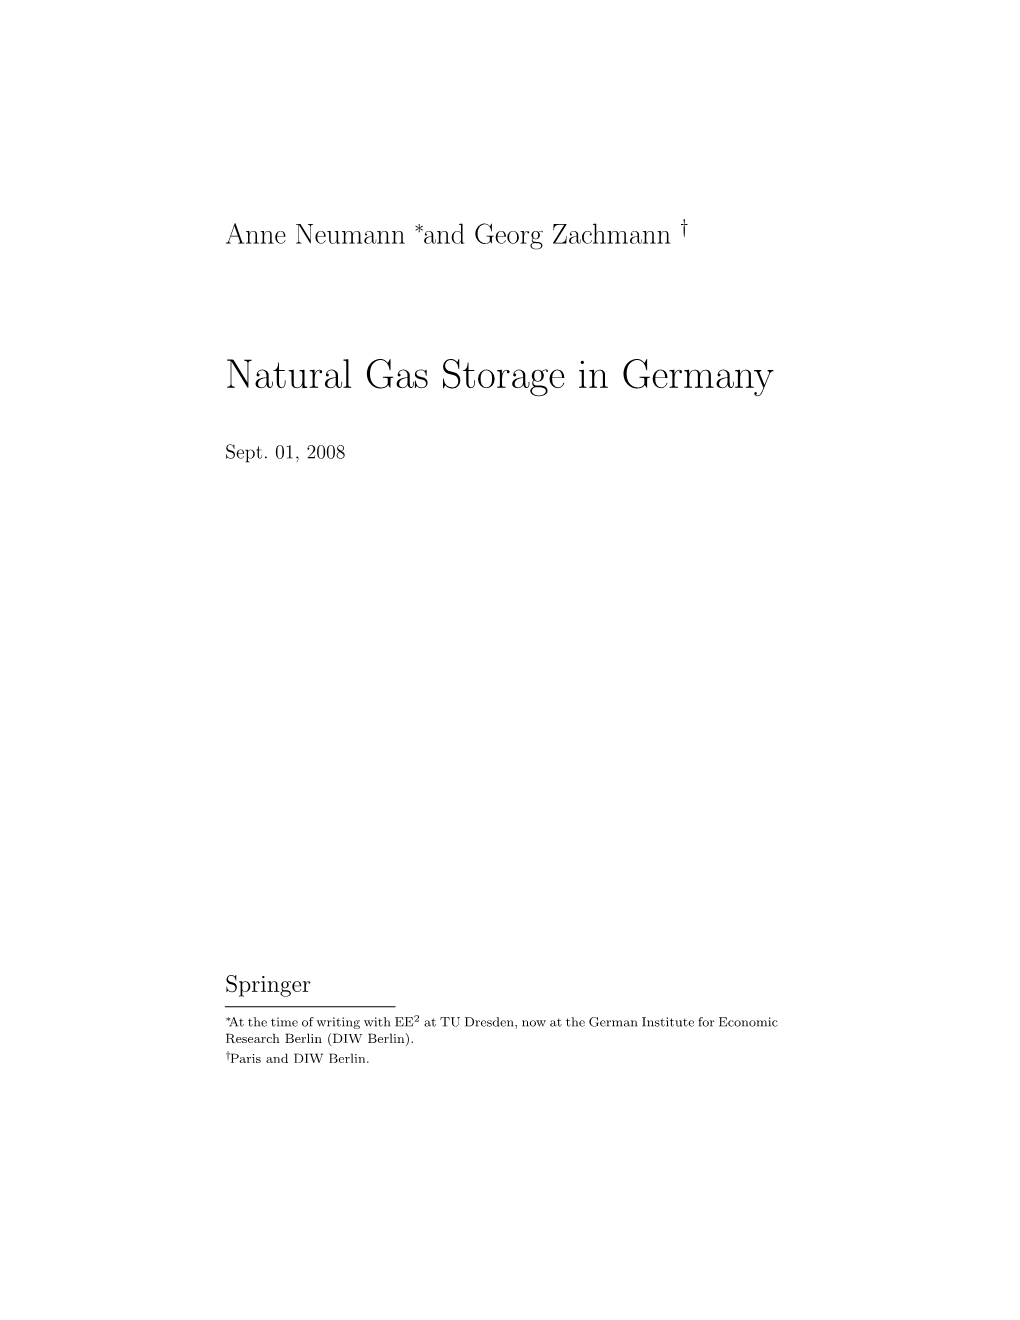 Natural Gas Storage in Germany